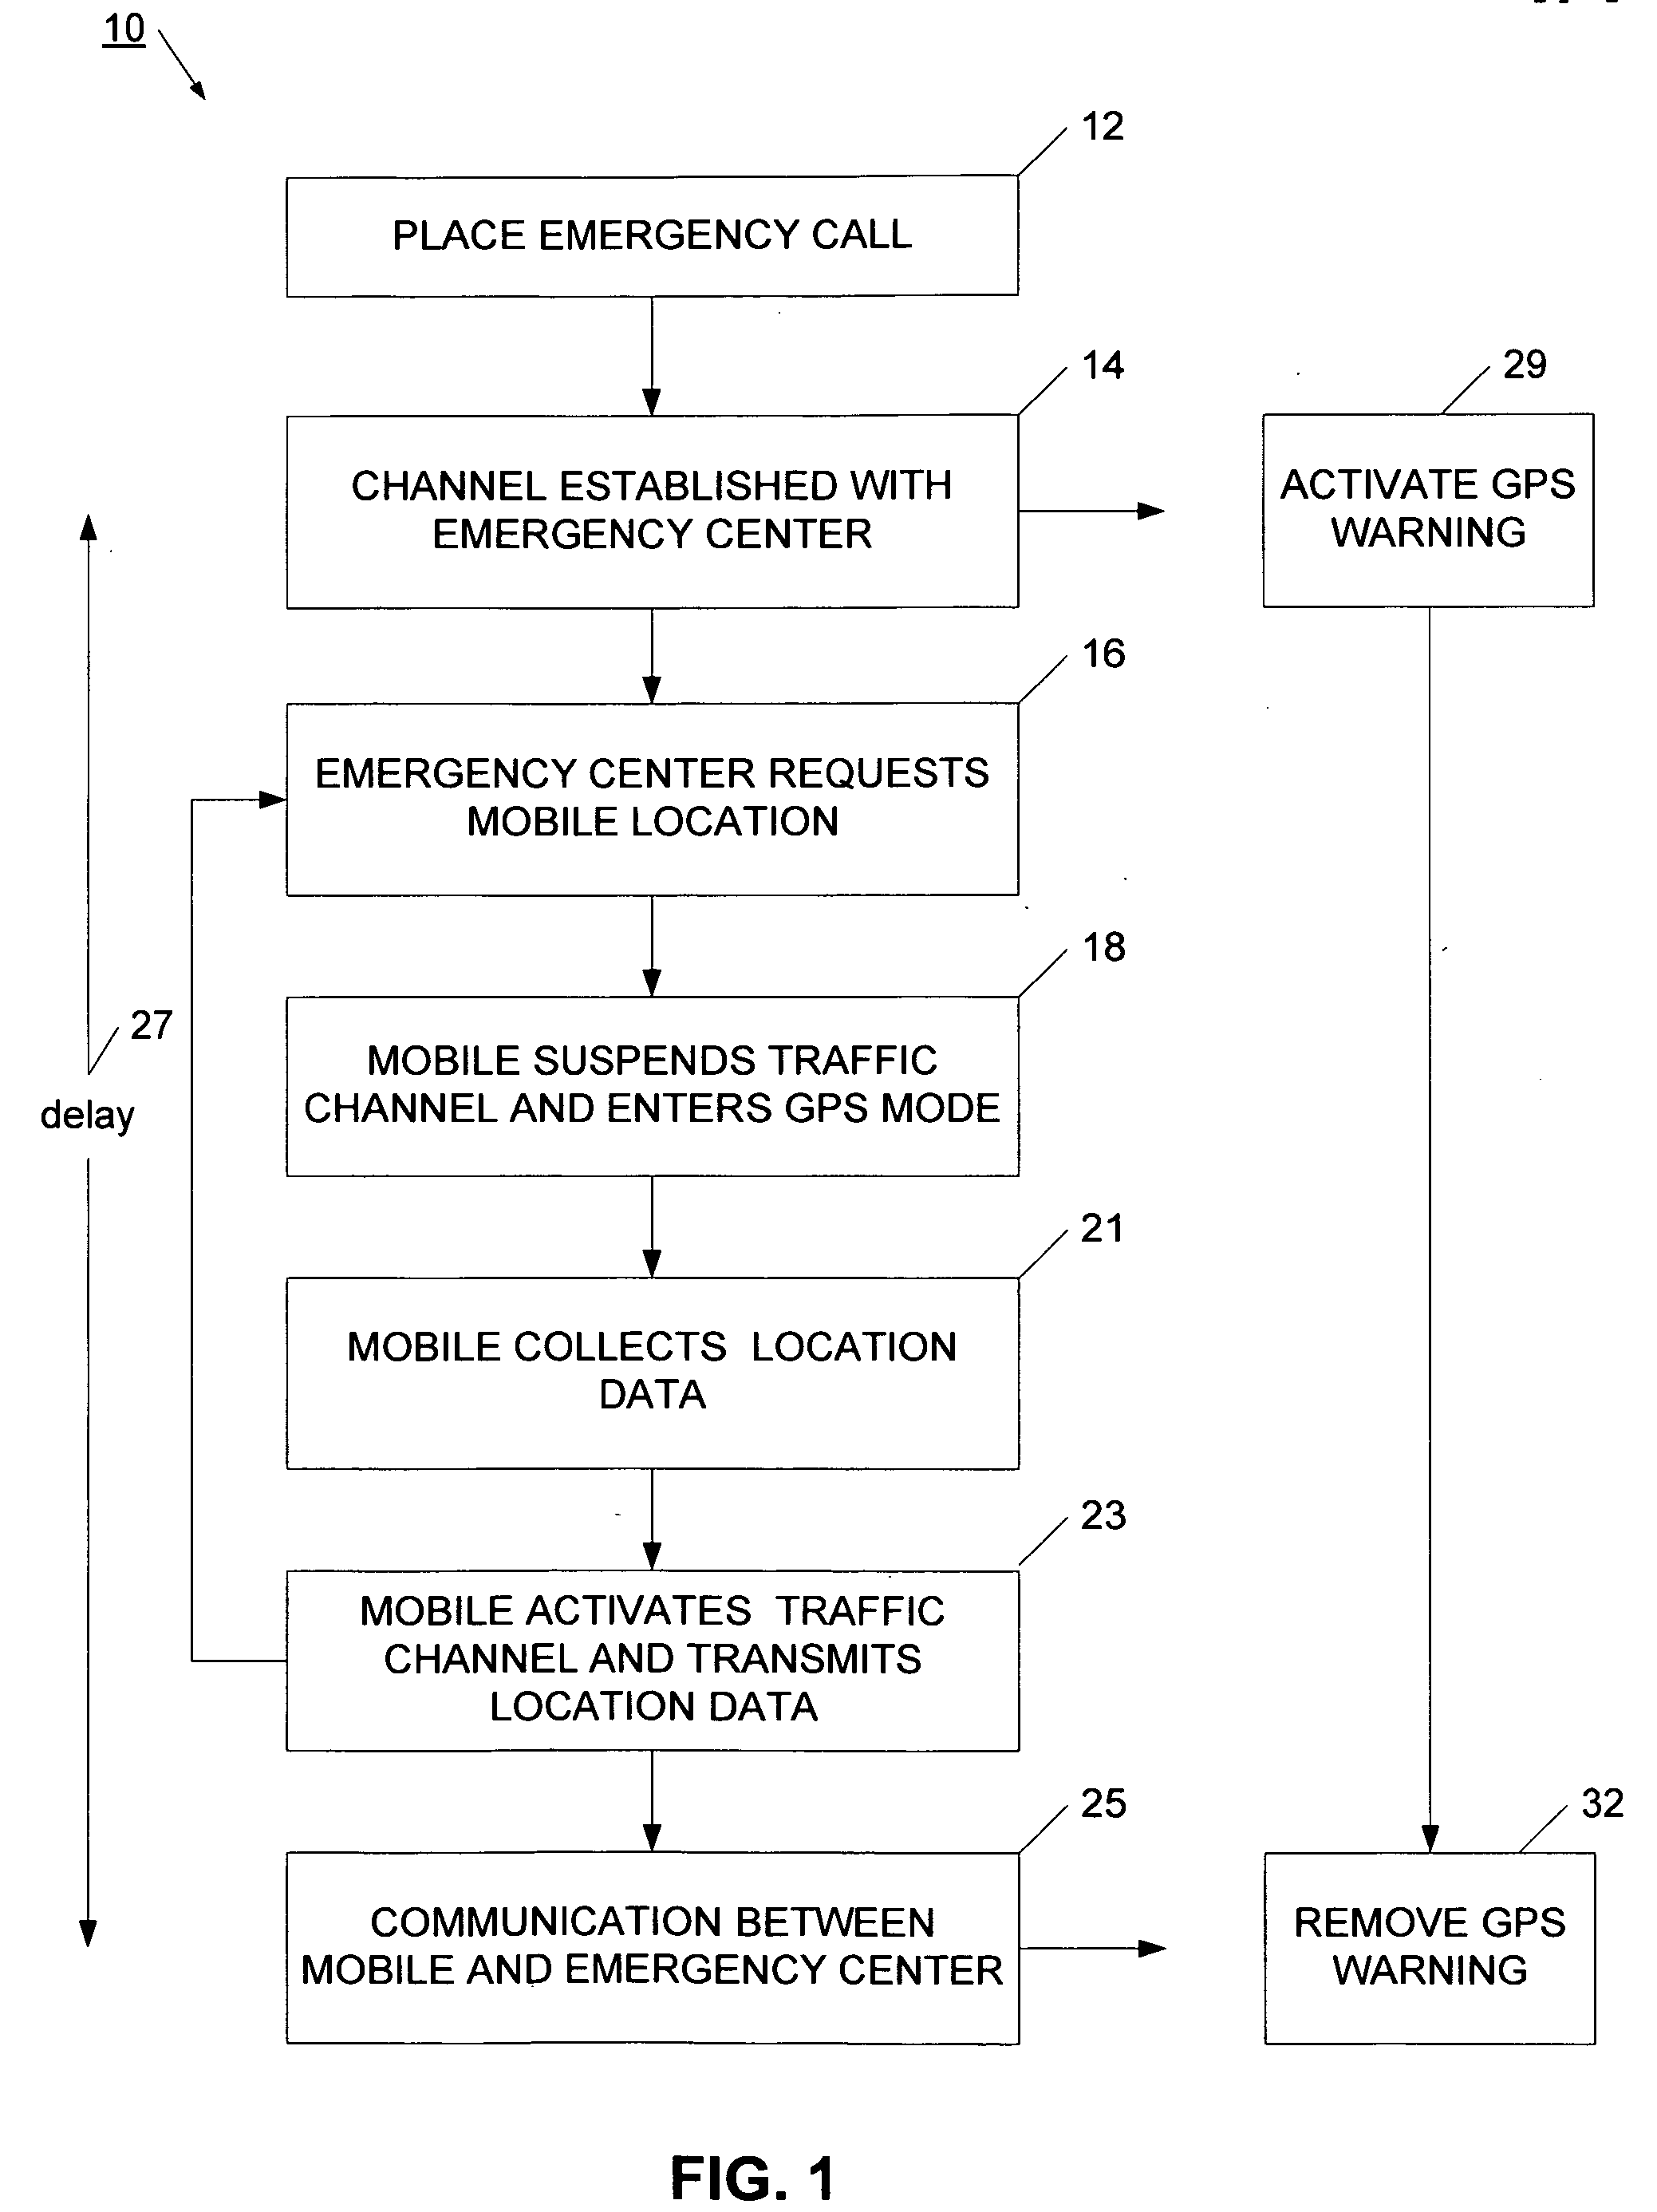 System and method for call processing in a mobile device with position location capability